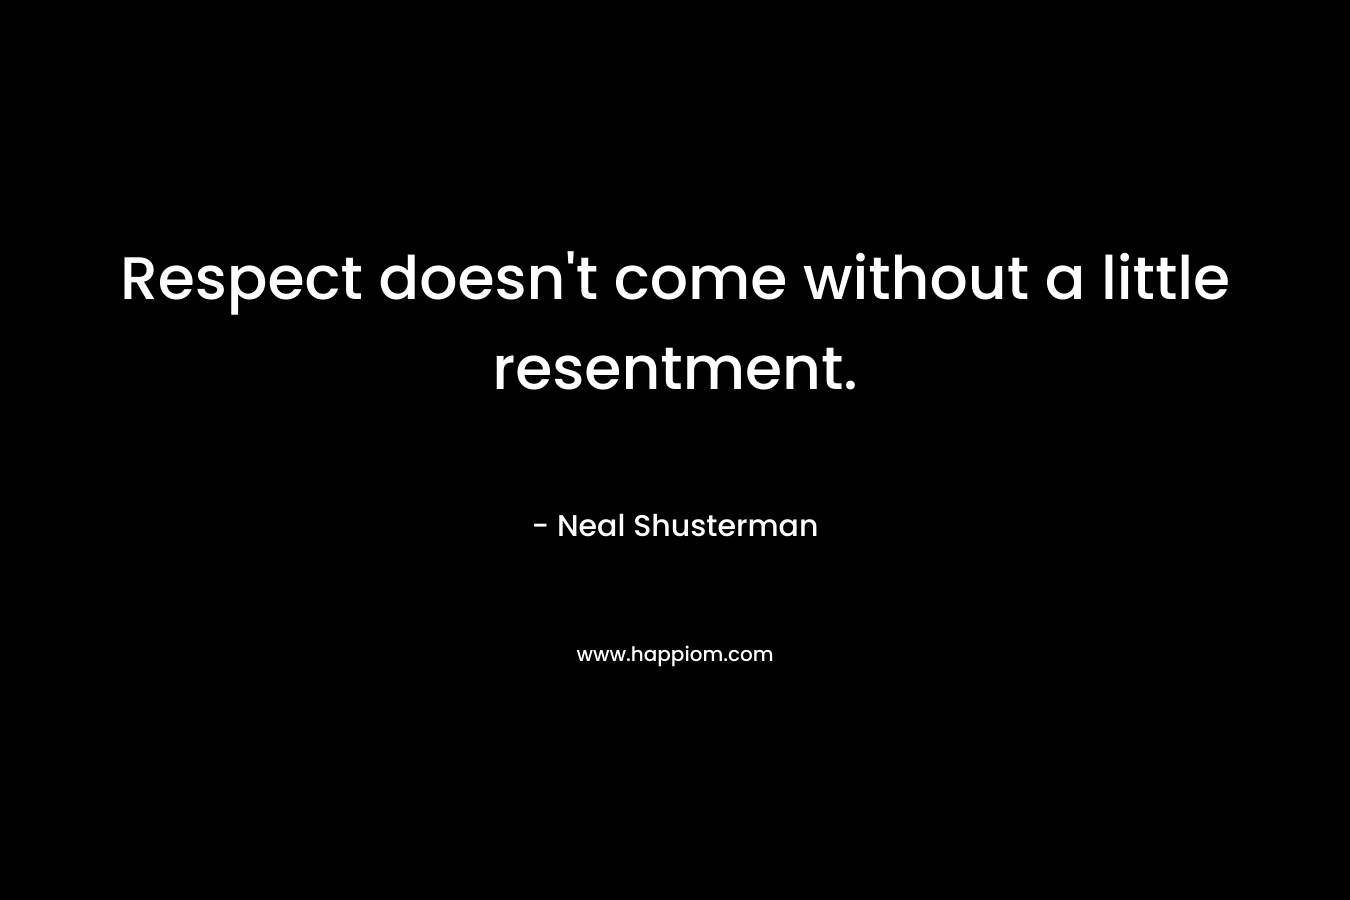 Respect doesn’t come without a little resentment. – Neal Shusterman